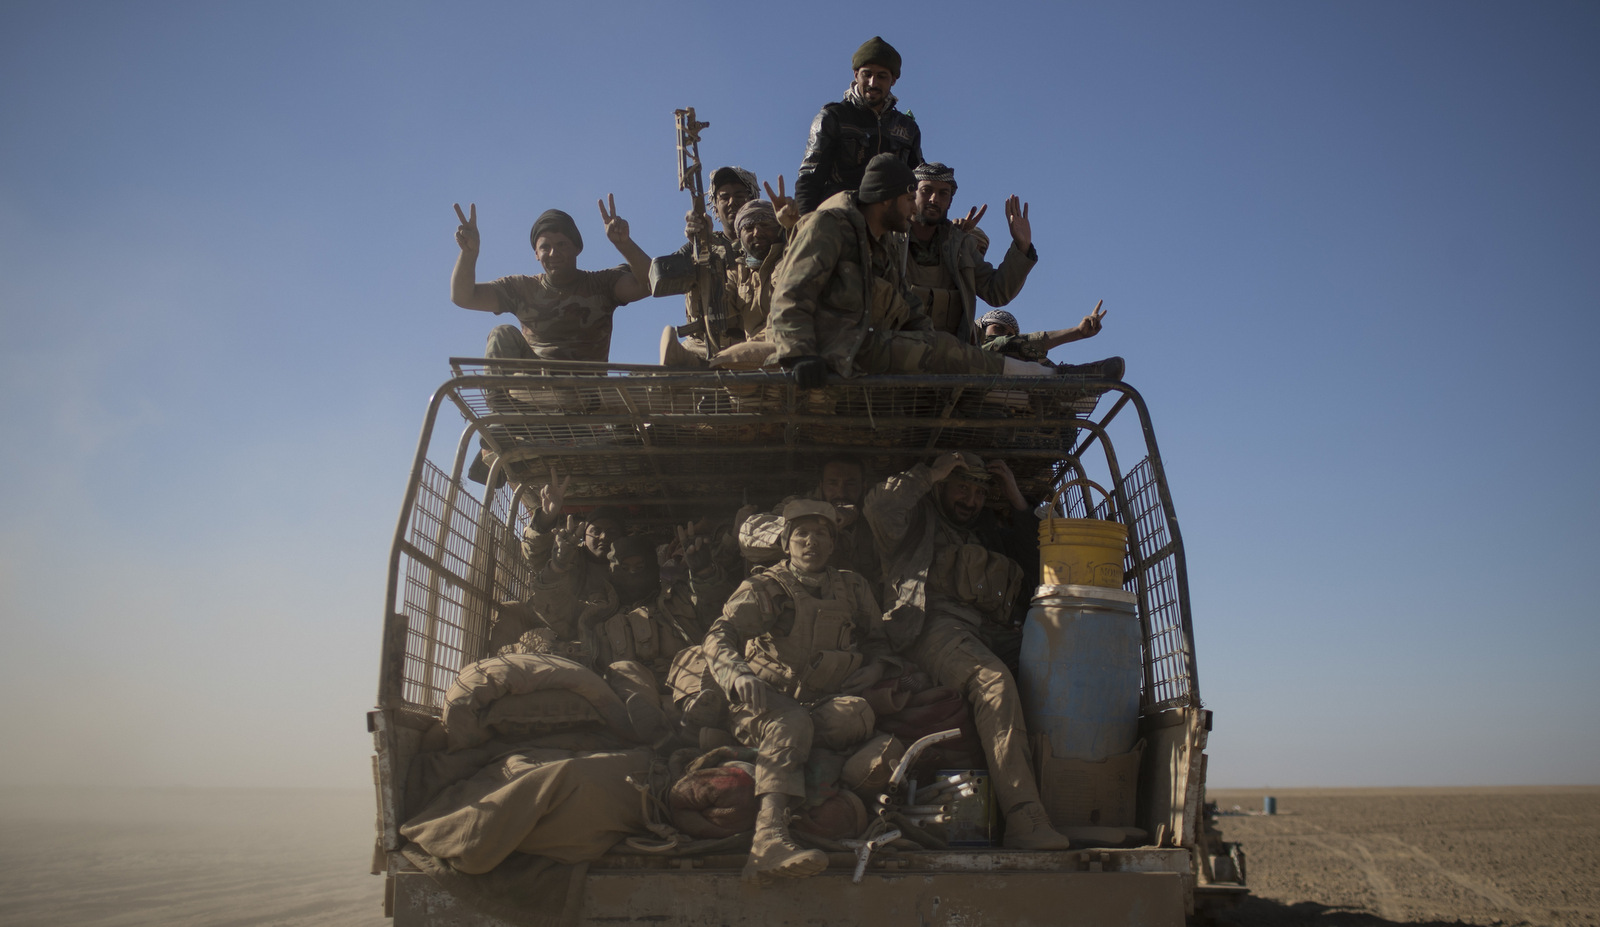 Member of Iraq's Popular Mobilization Units, which are closely aligned with Iran, could quickly turn on US forces in a third Gulf War. (AP/Felipe Dana)